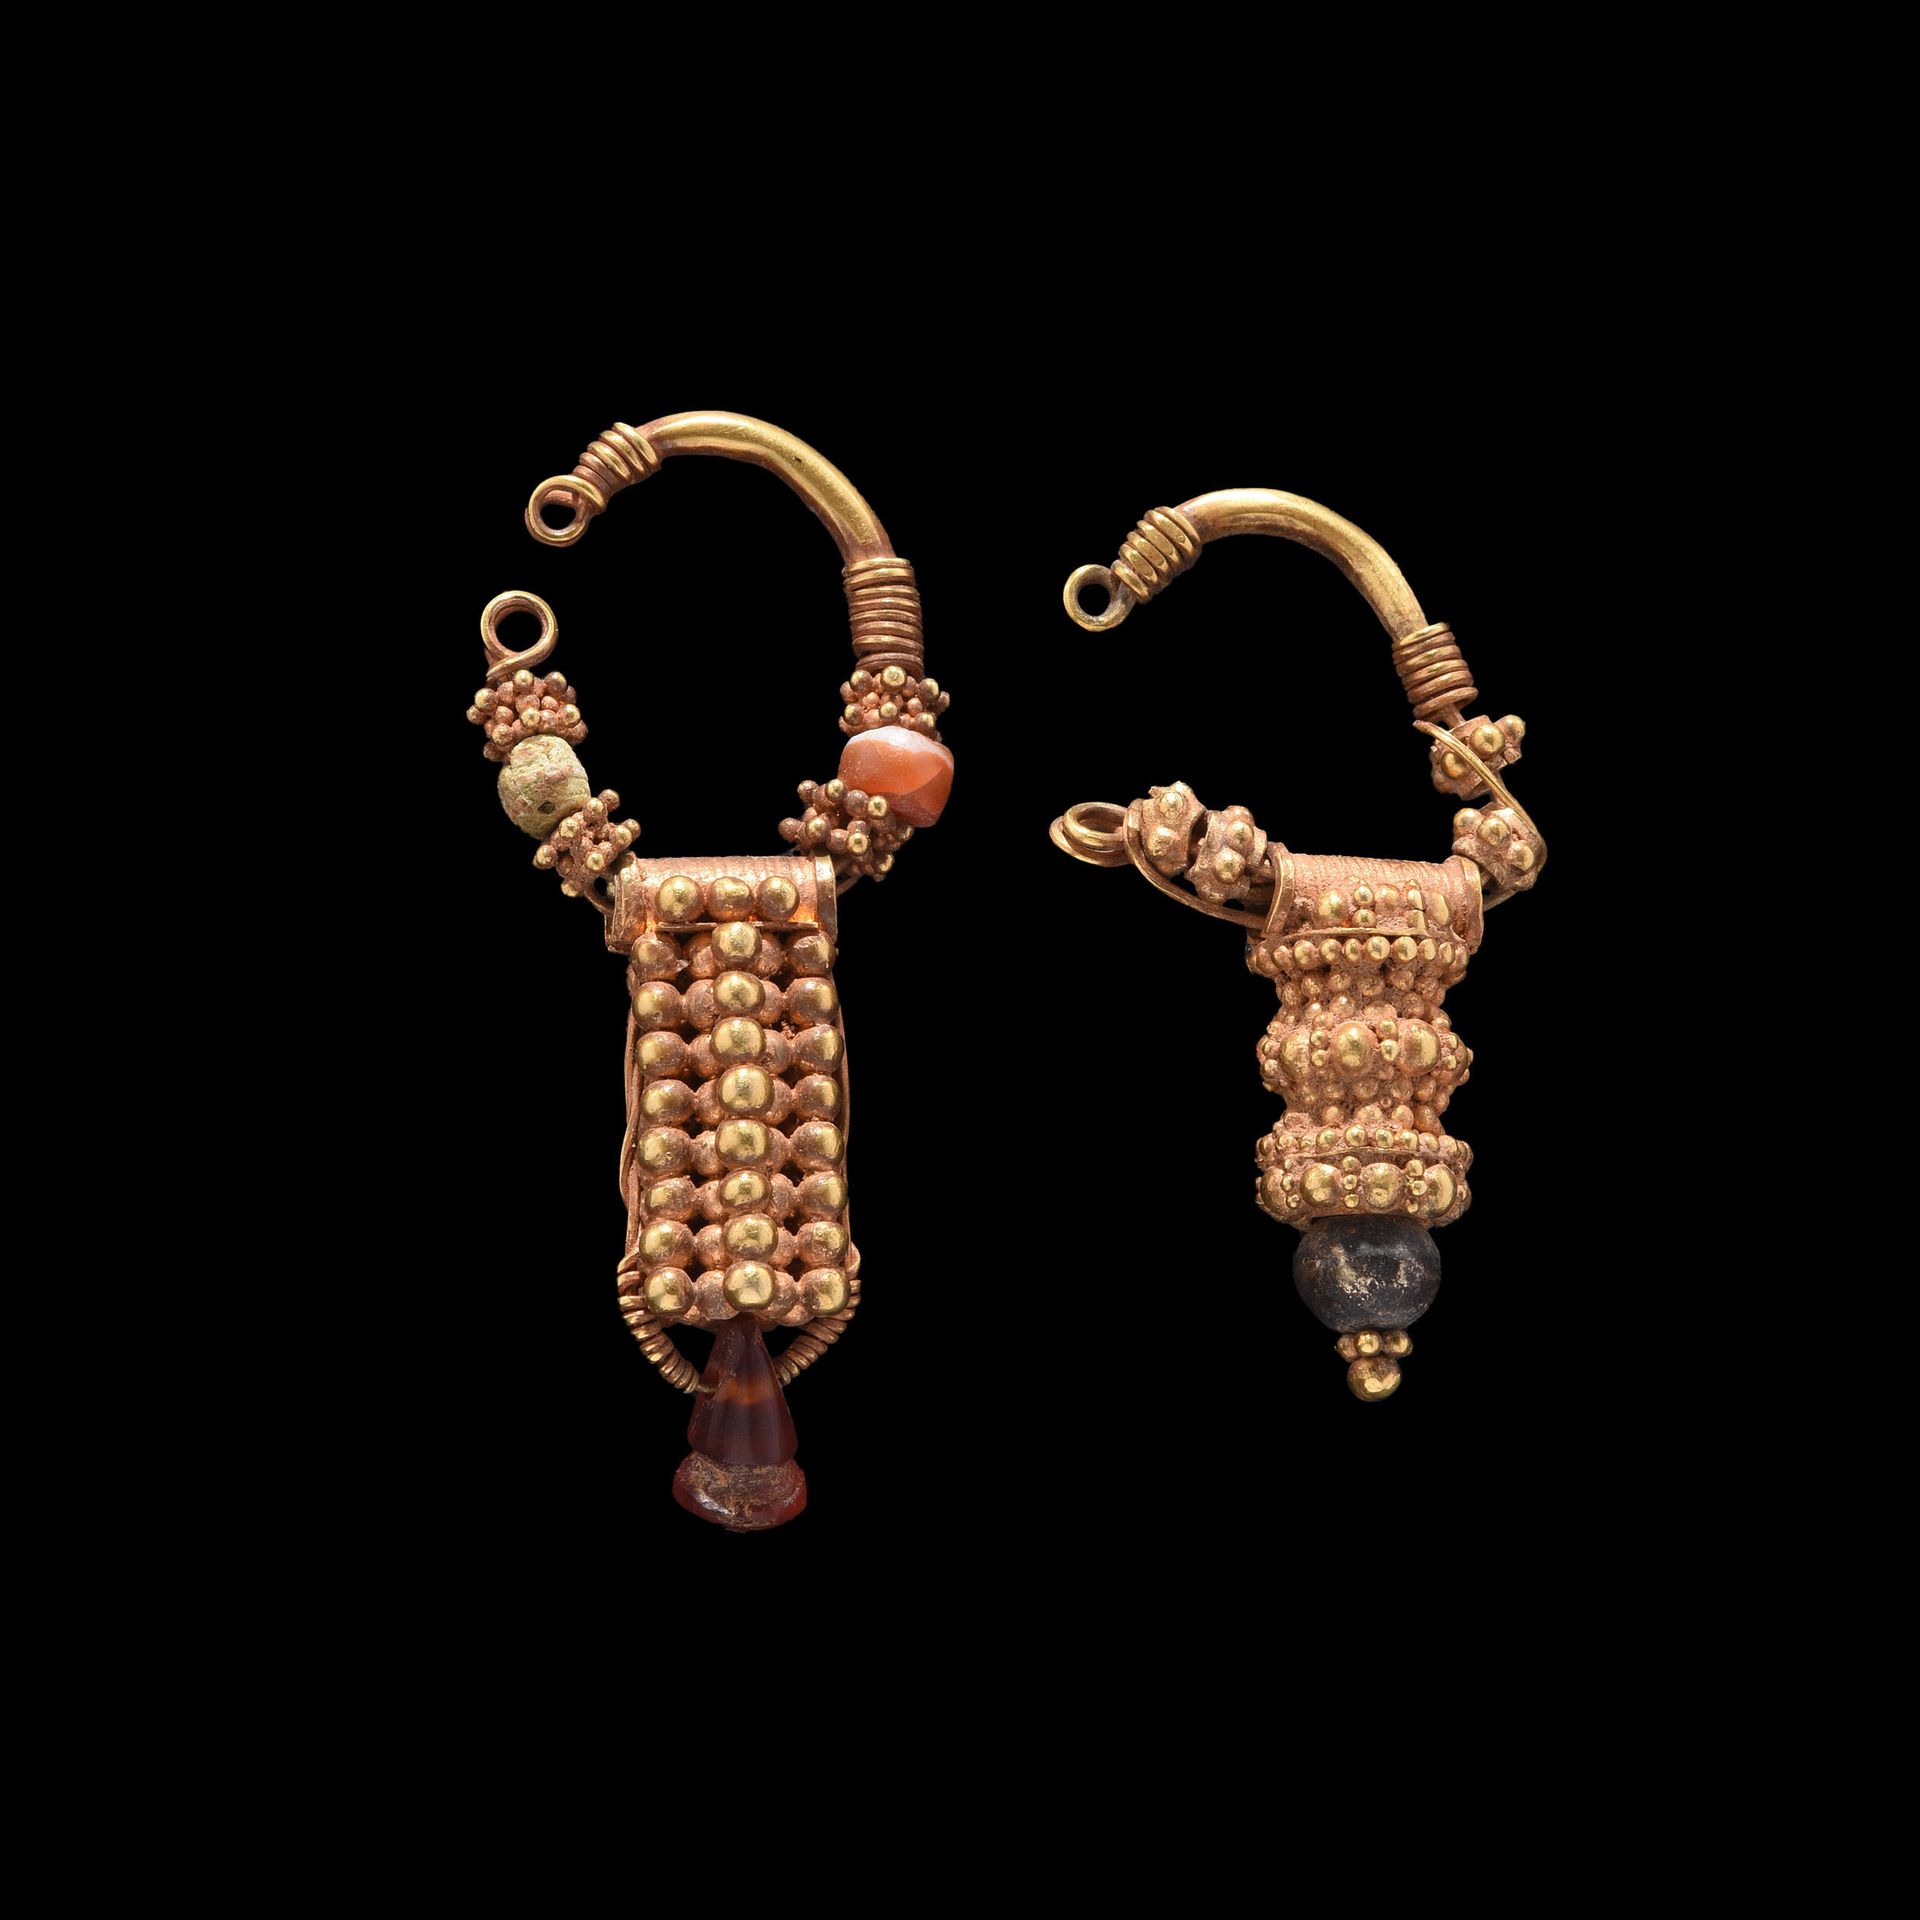 Null TWO EARRINGS

Phoenicia, 4th-3rd century BC

Gold, carnelian, glass paste (&hellip;